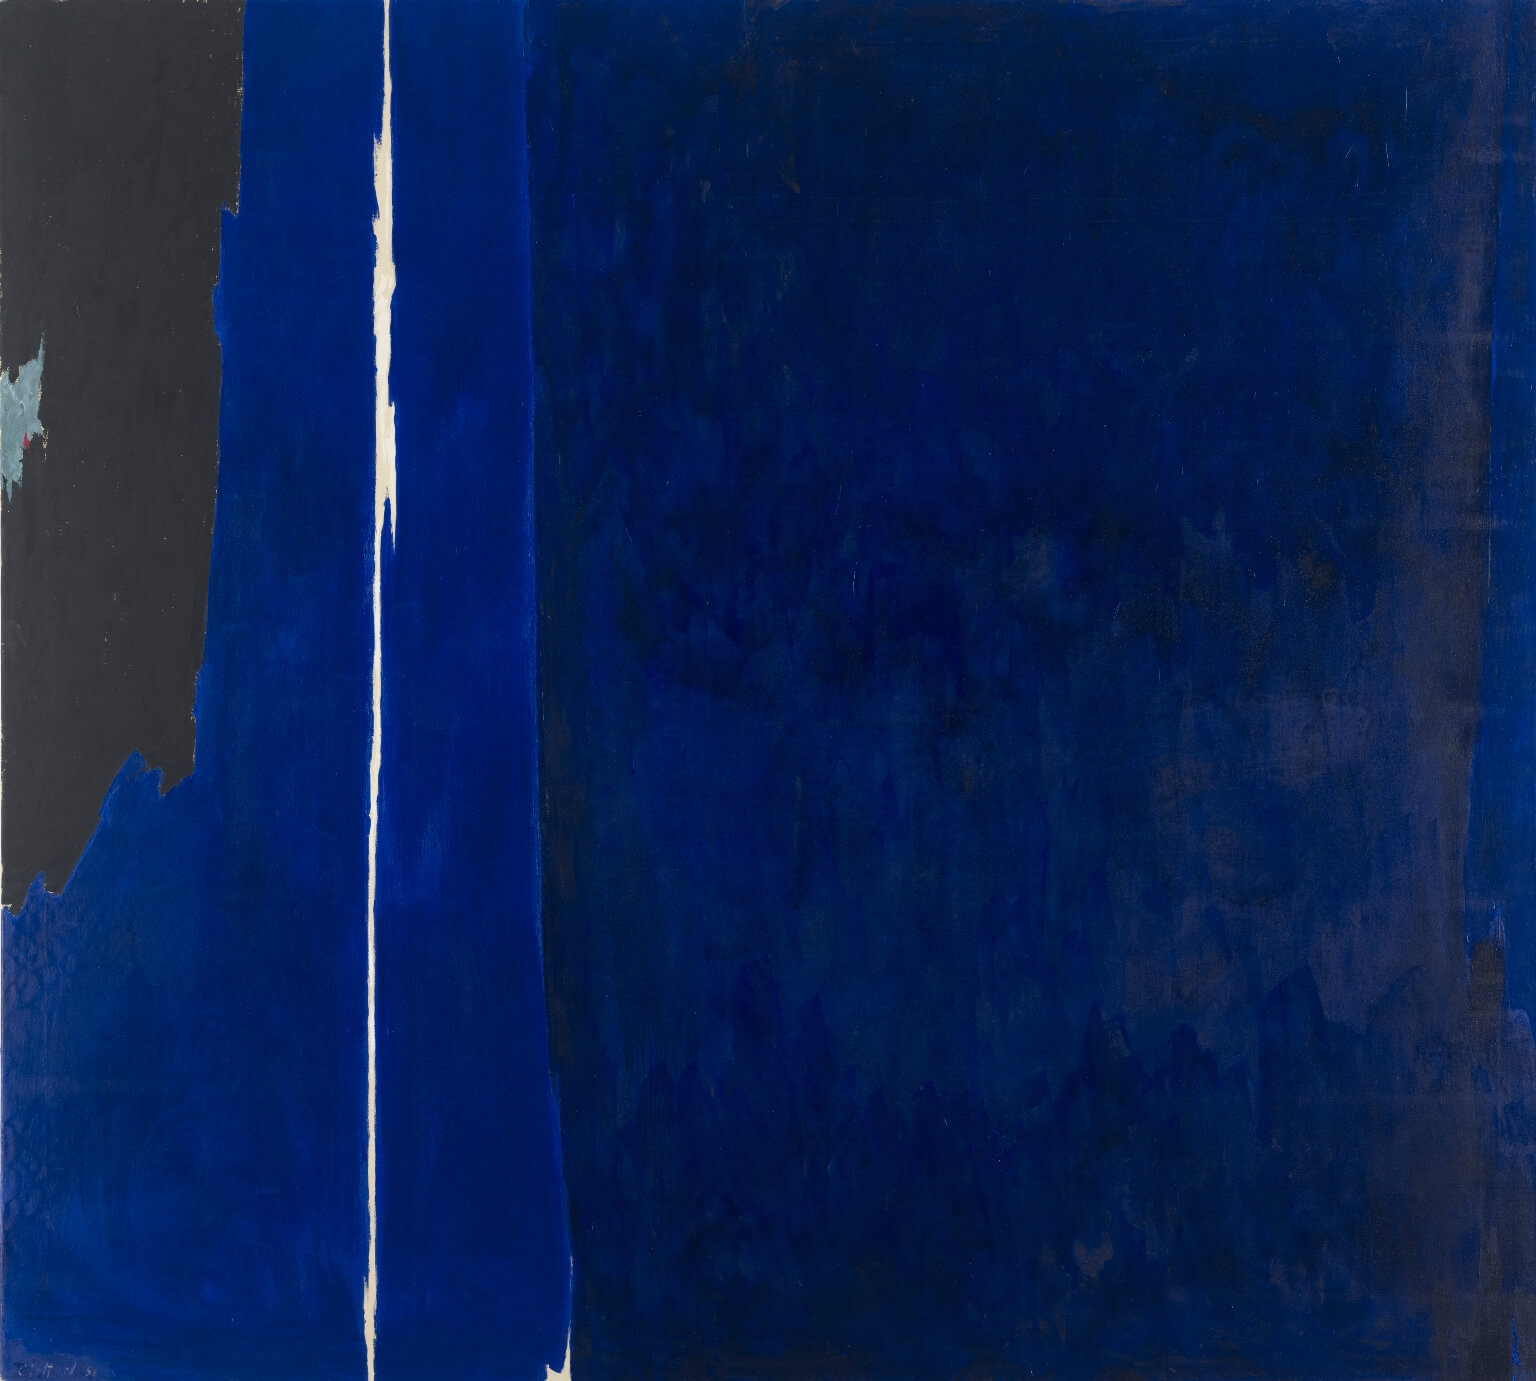 Horizontal abstract painting that is almost all different shades of dark blue, with a section of black on the left side and a thin vertical white line on the left third